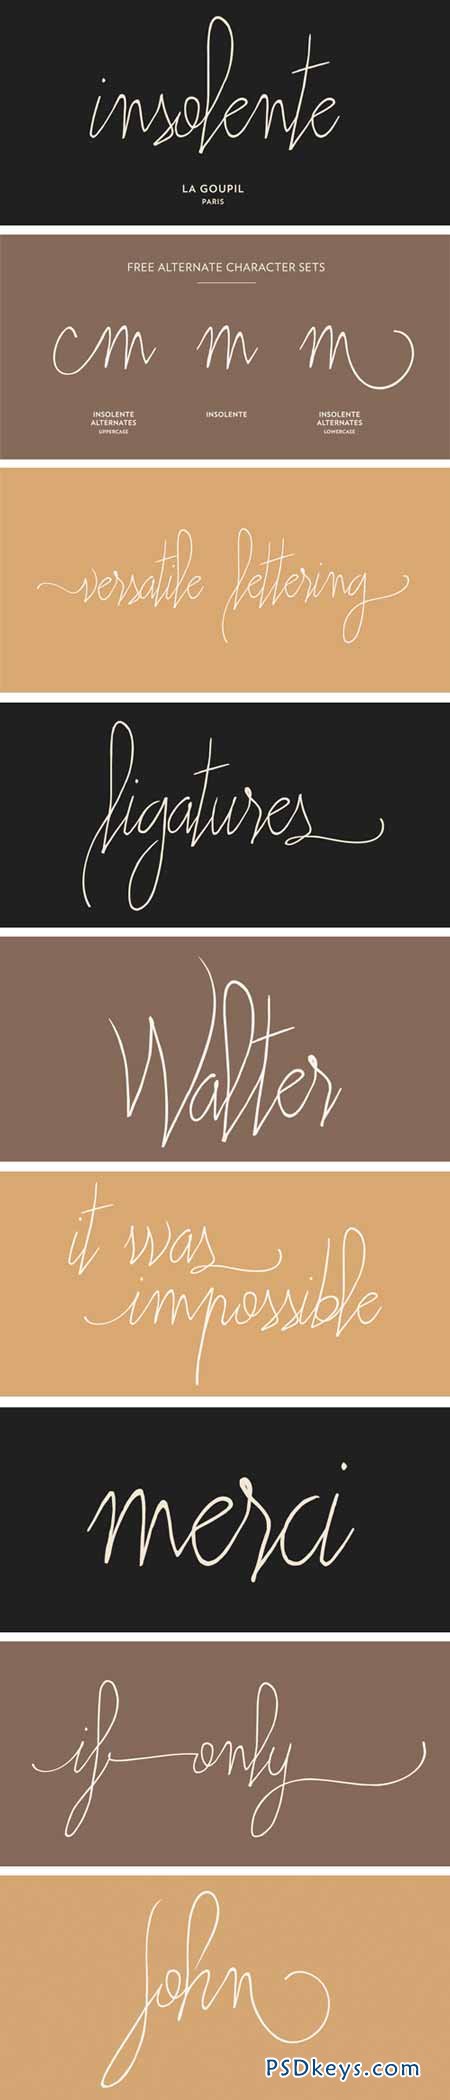 Insolente Font Family - 2 Fonts for $15